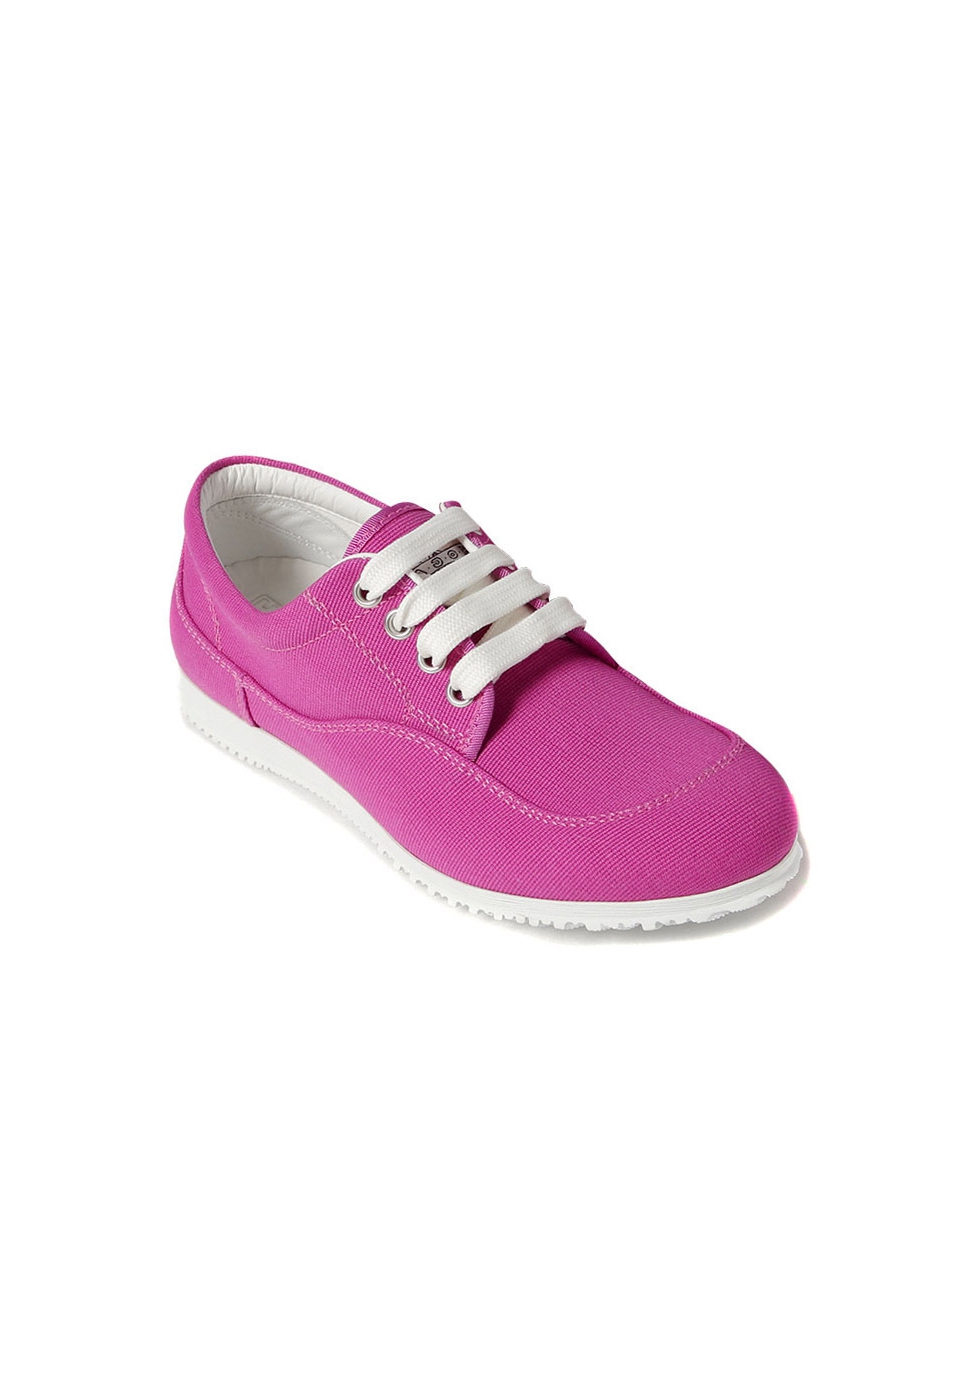 Hogan Women's fashion low top round toe lace-ups sneakers in pink ...